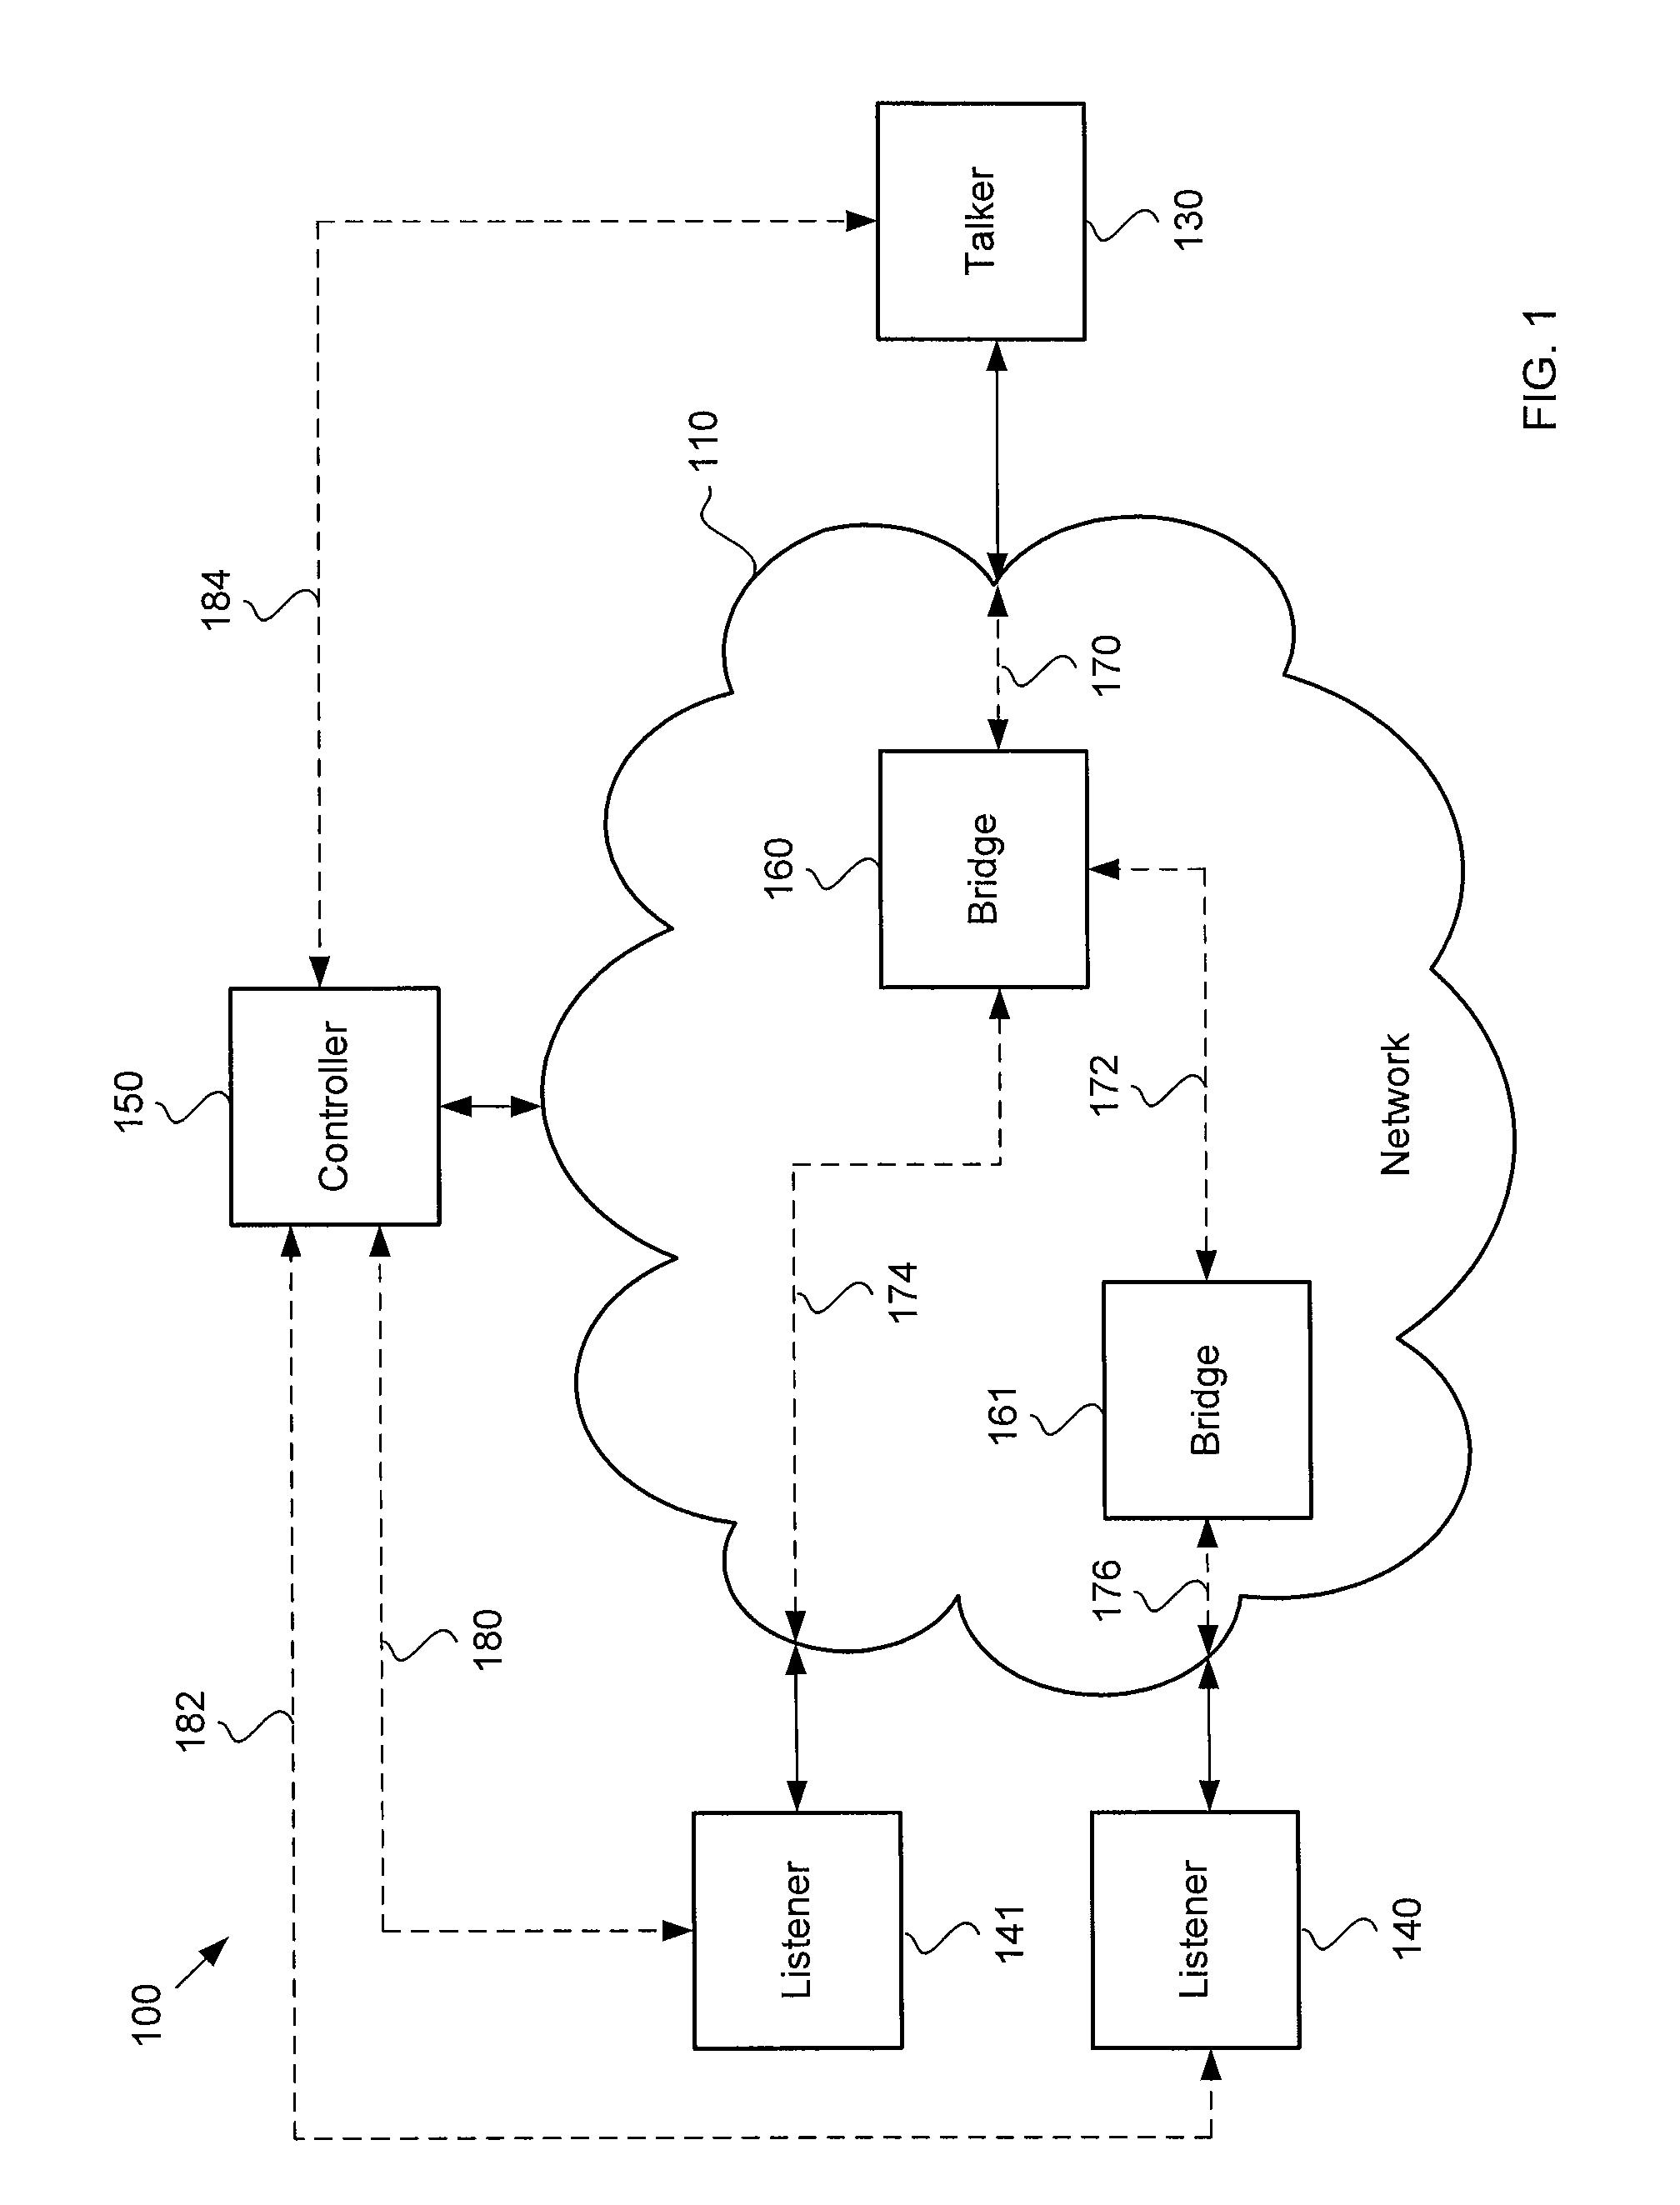 System for optimizing latency in an avb network